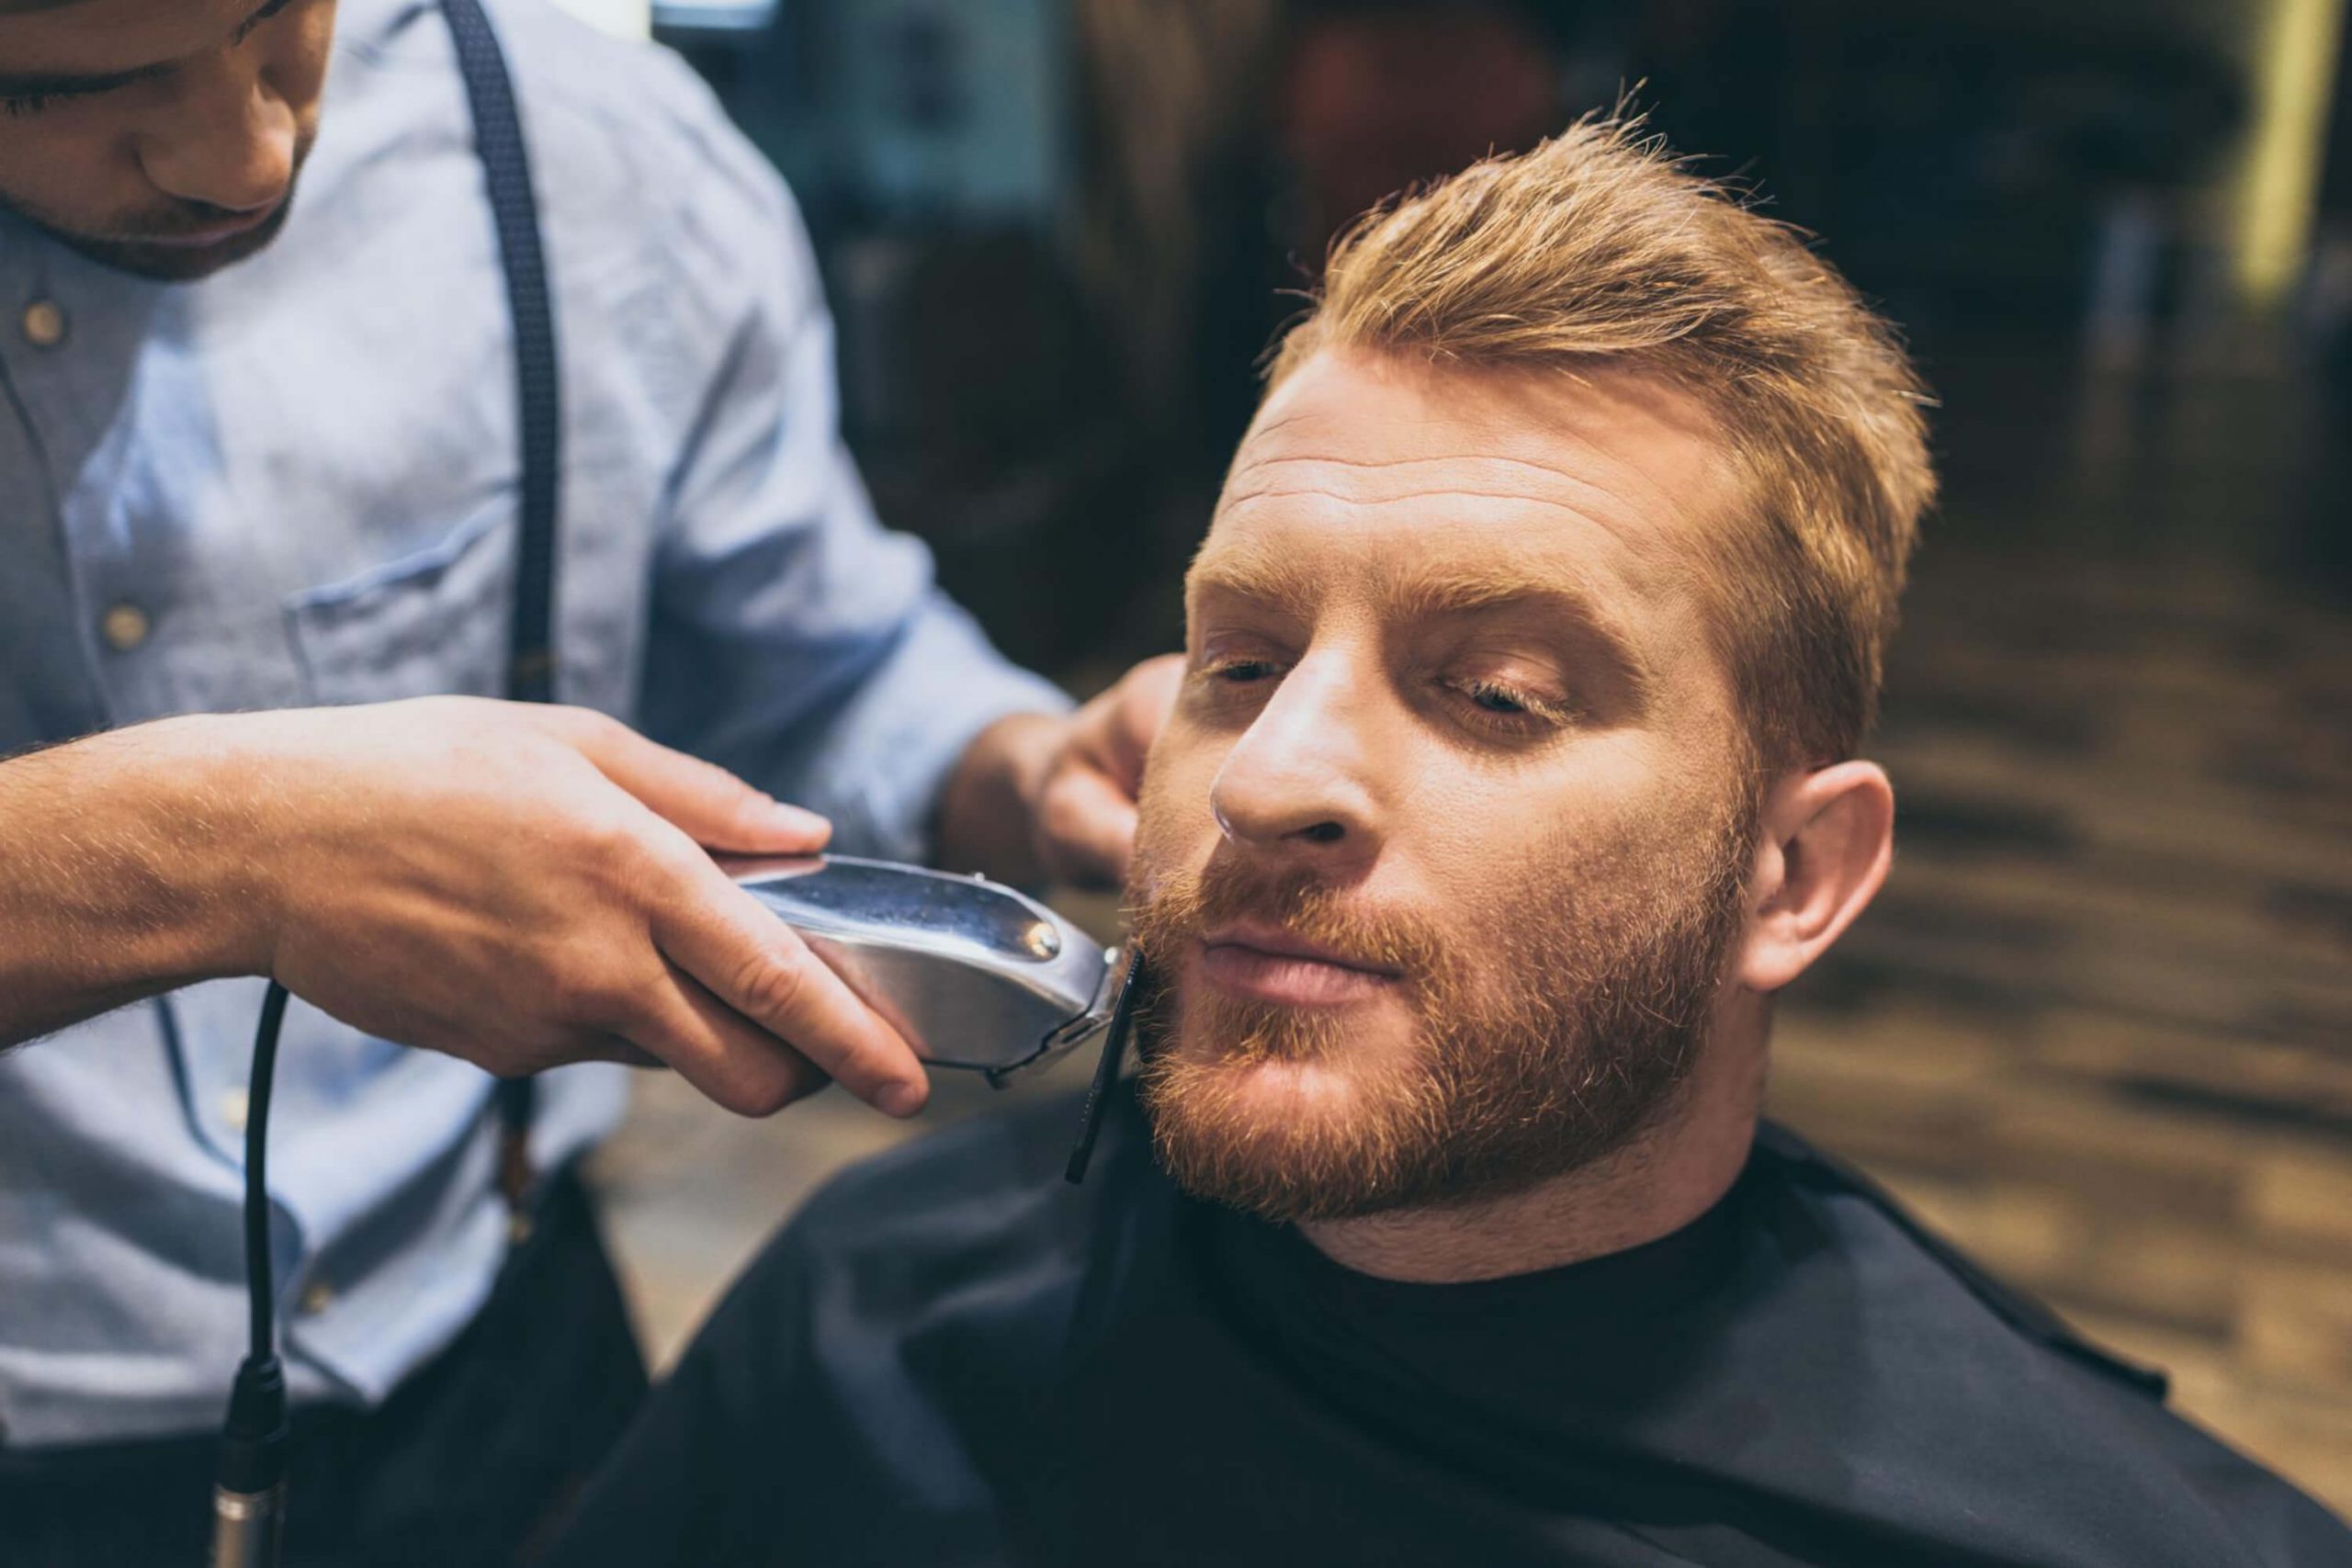 What Affects the Amount Of Time Needed For a Man’s Haircut